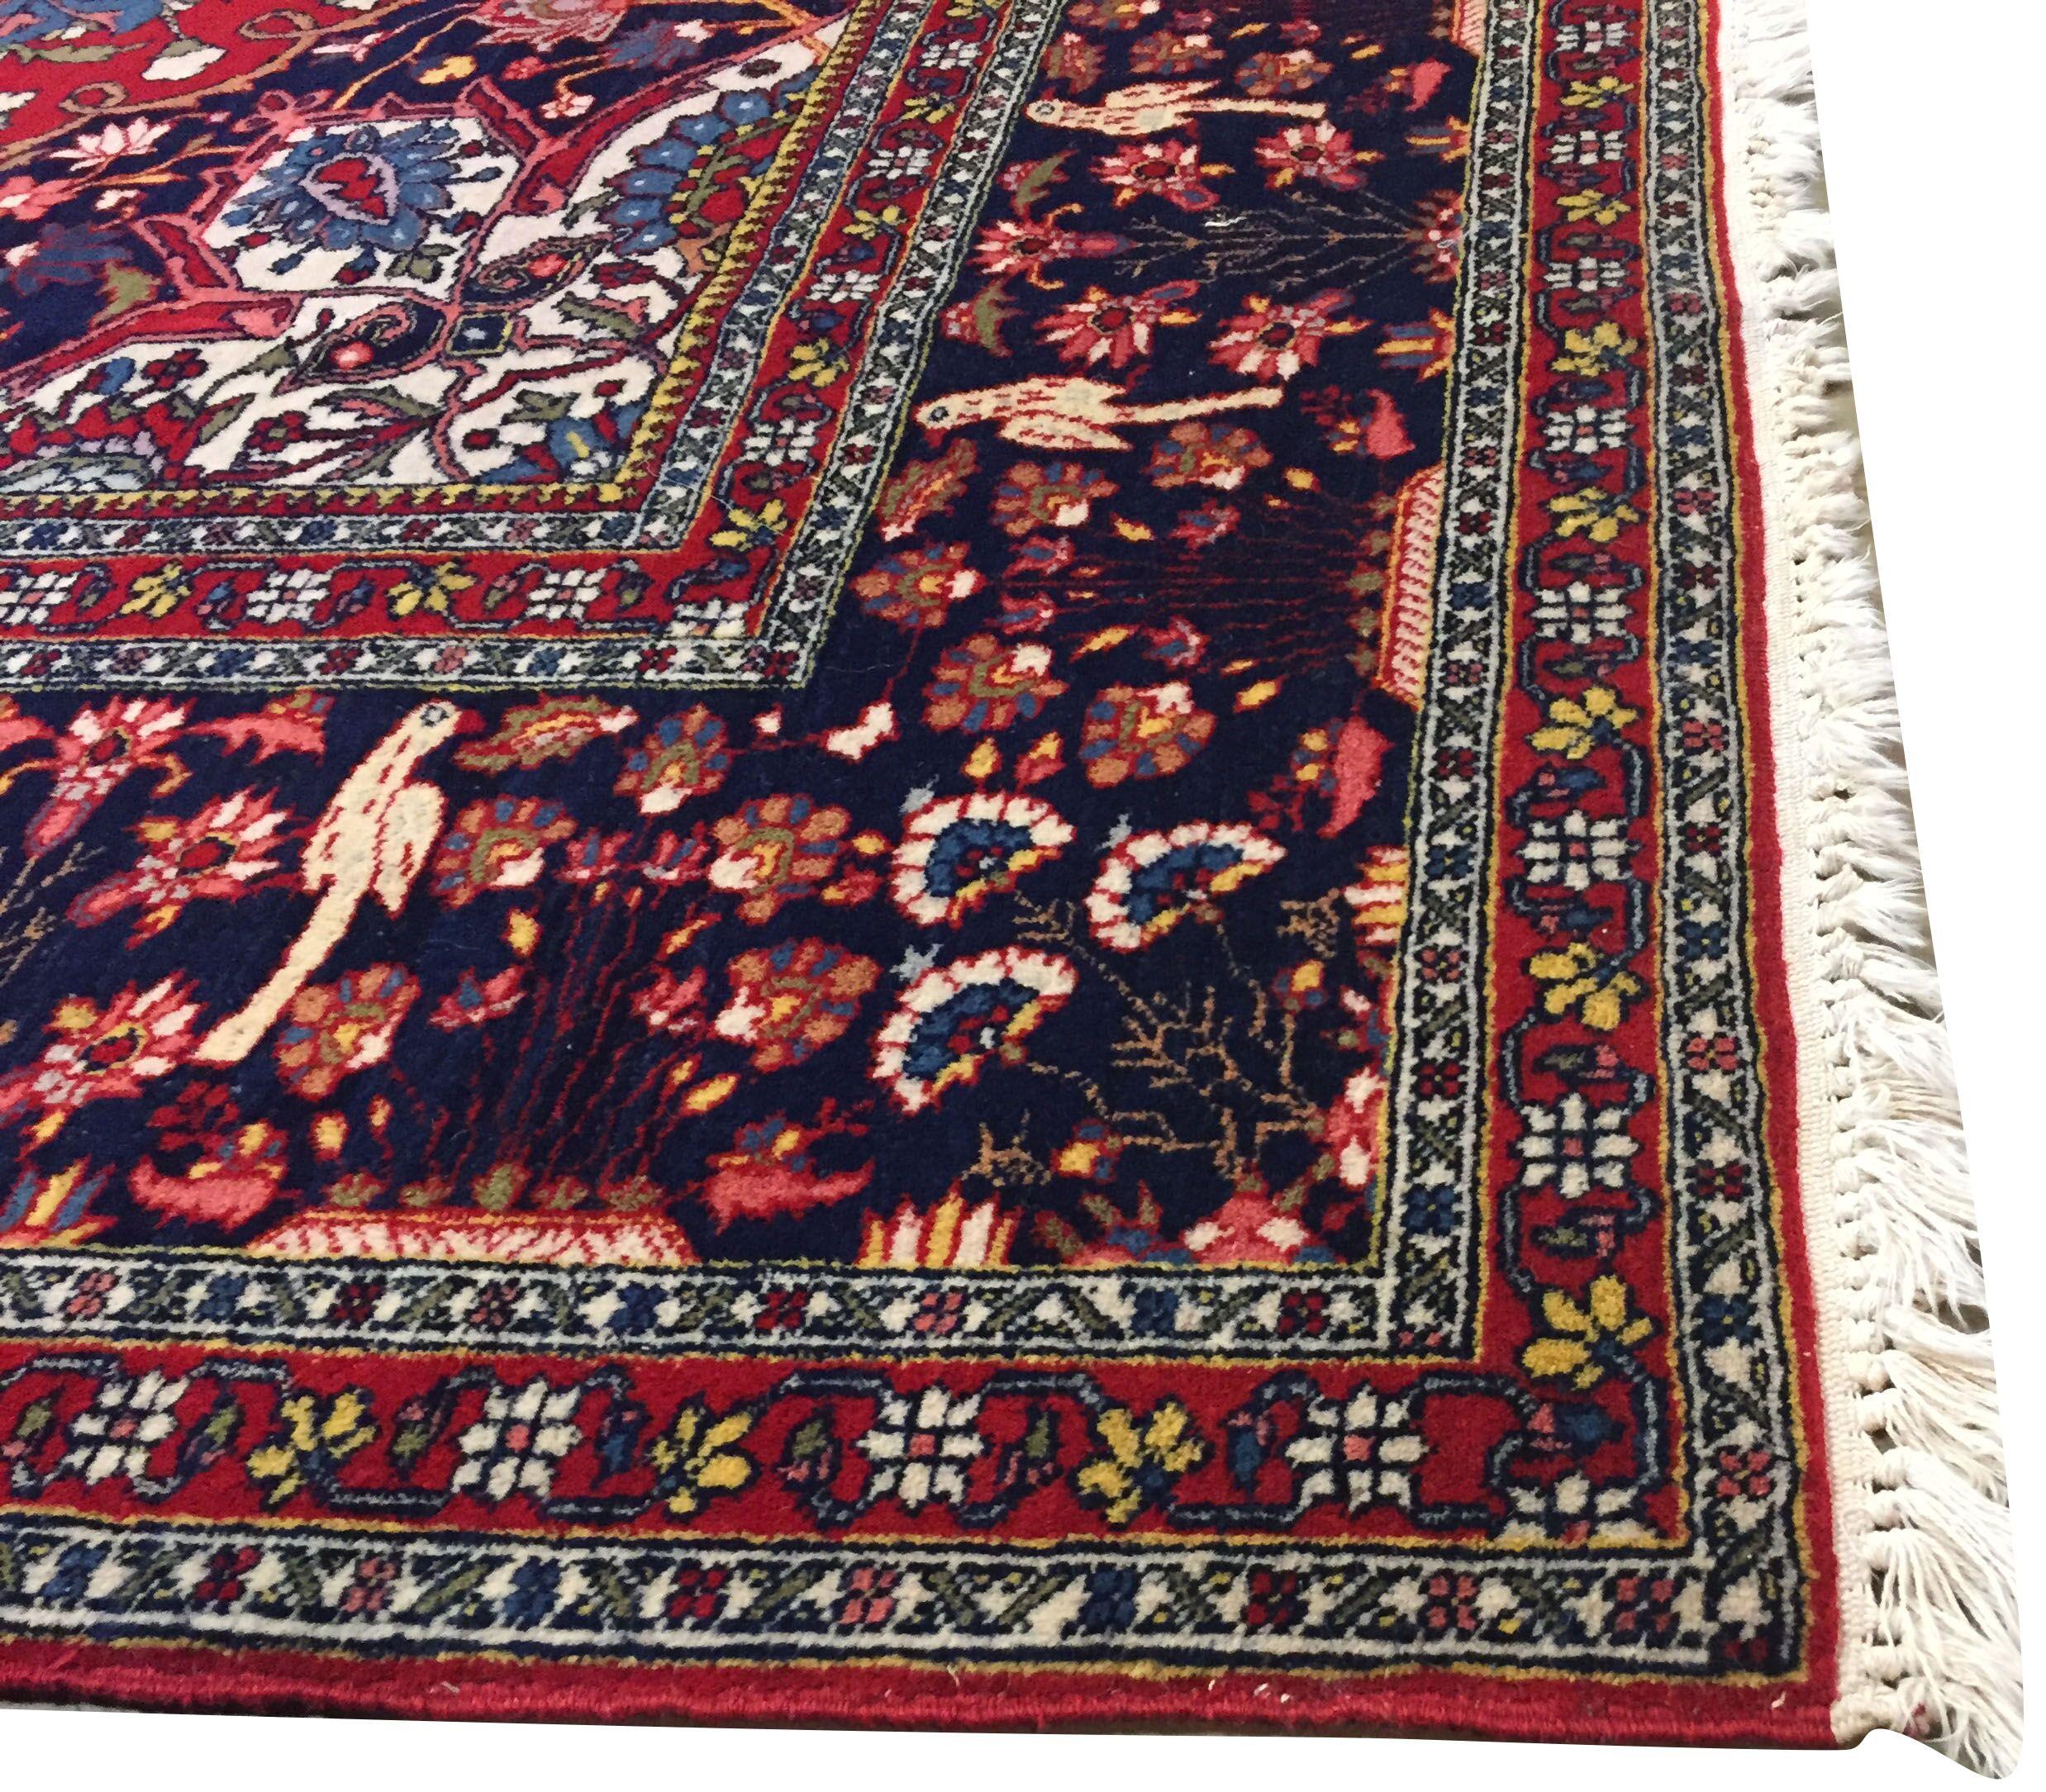 Vintage Persian Tabriz carpet rug. 8'6 x 11'6. with an ornate Mohtashem design on a red field. Colors: Reds/blues/ivory/yellow.